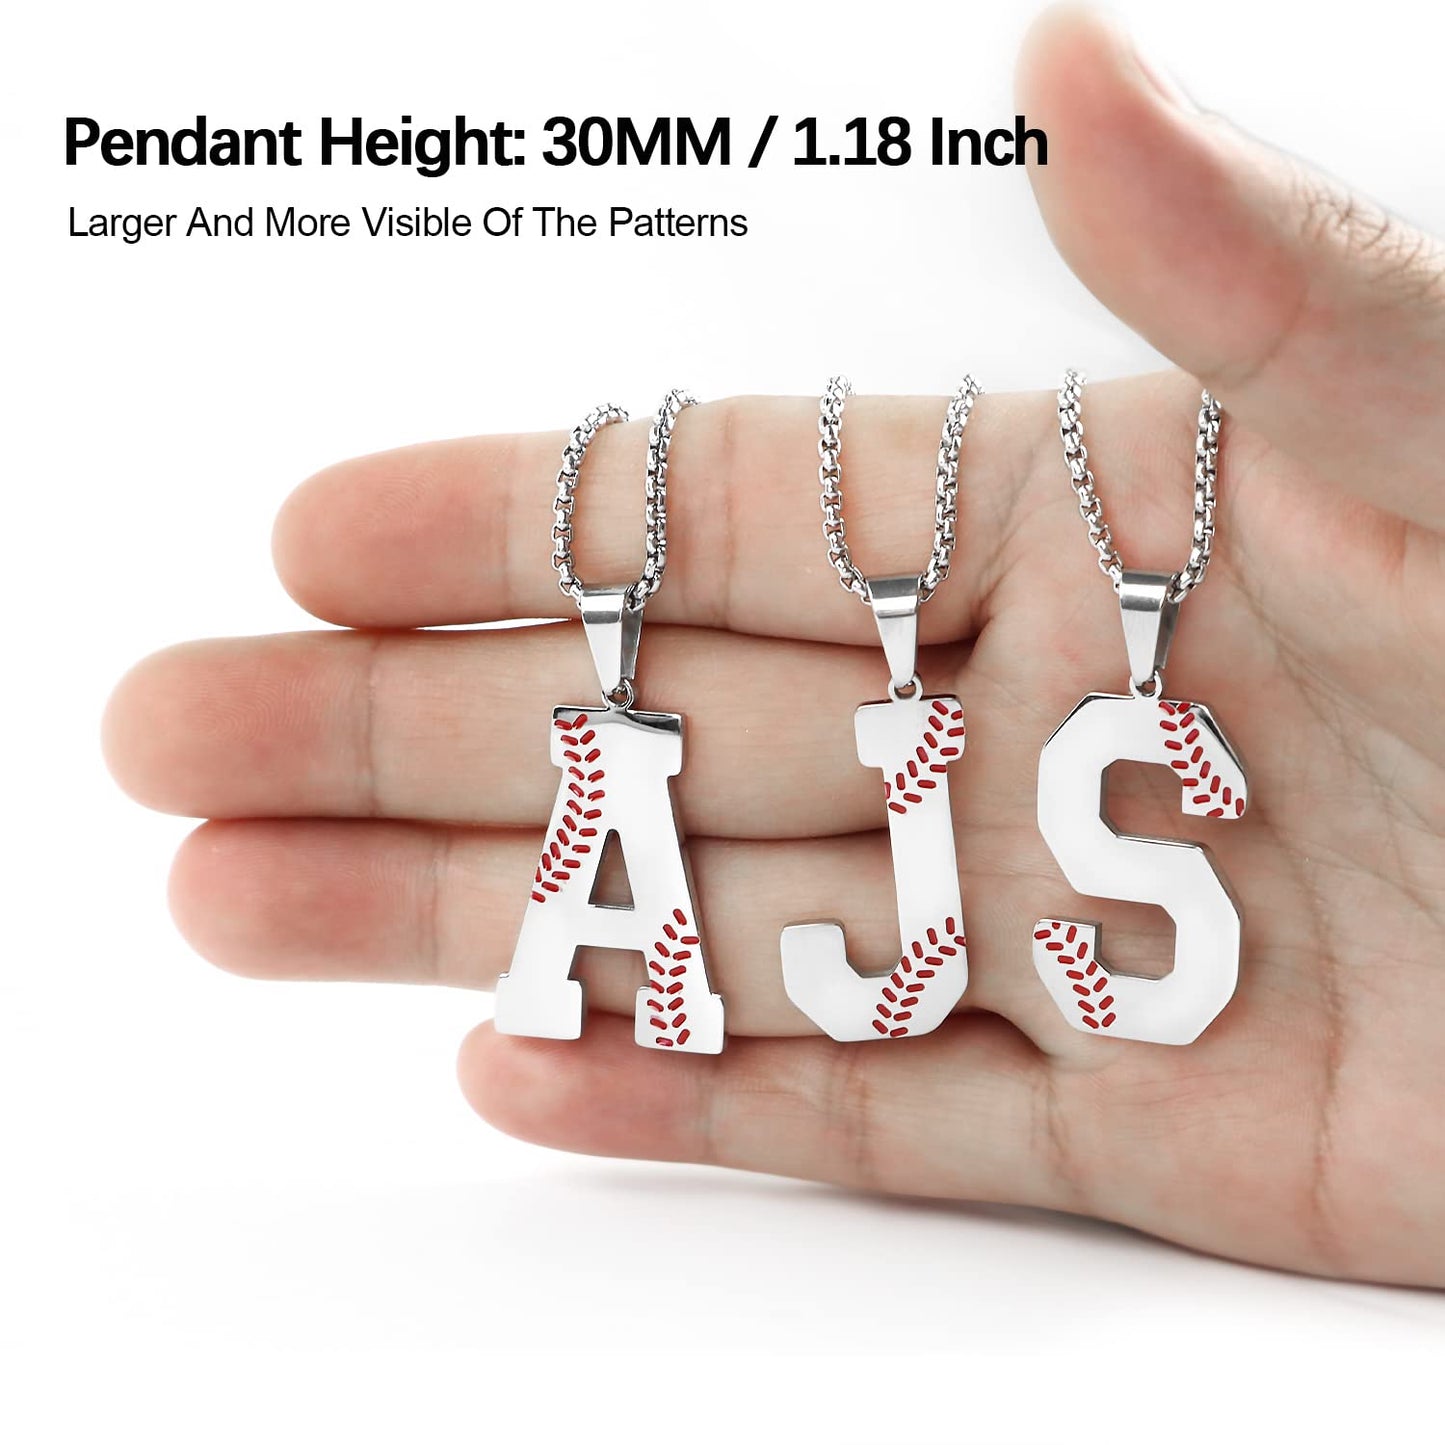 Baseball Initial Necklace for Boys Men A-Z Letter Necklaces Chain Stainless Steel Pendant with Accessories Sport Charm Baseball Gifts for Team Player Athlete Lover Fans